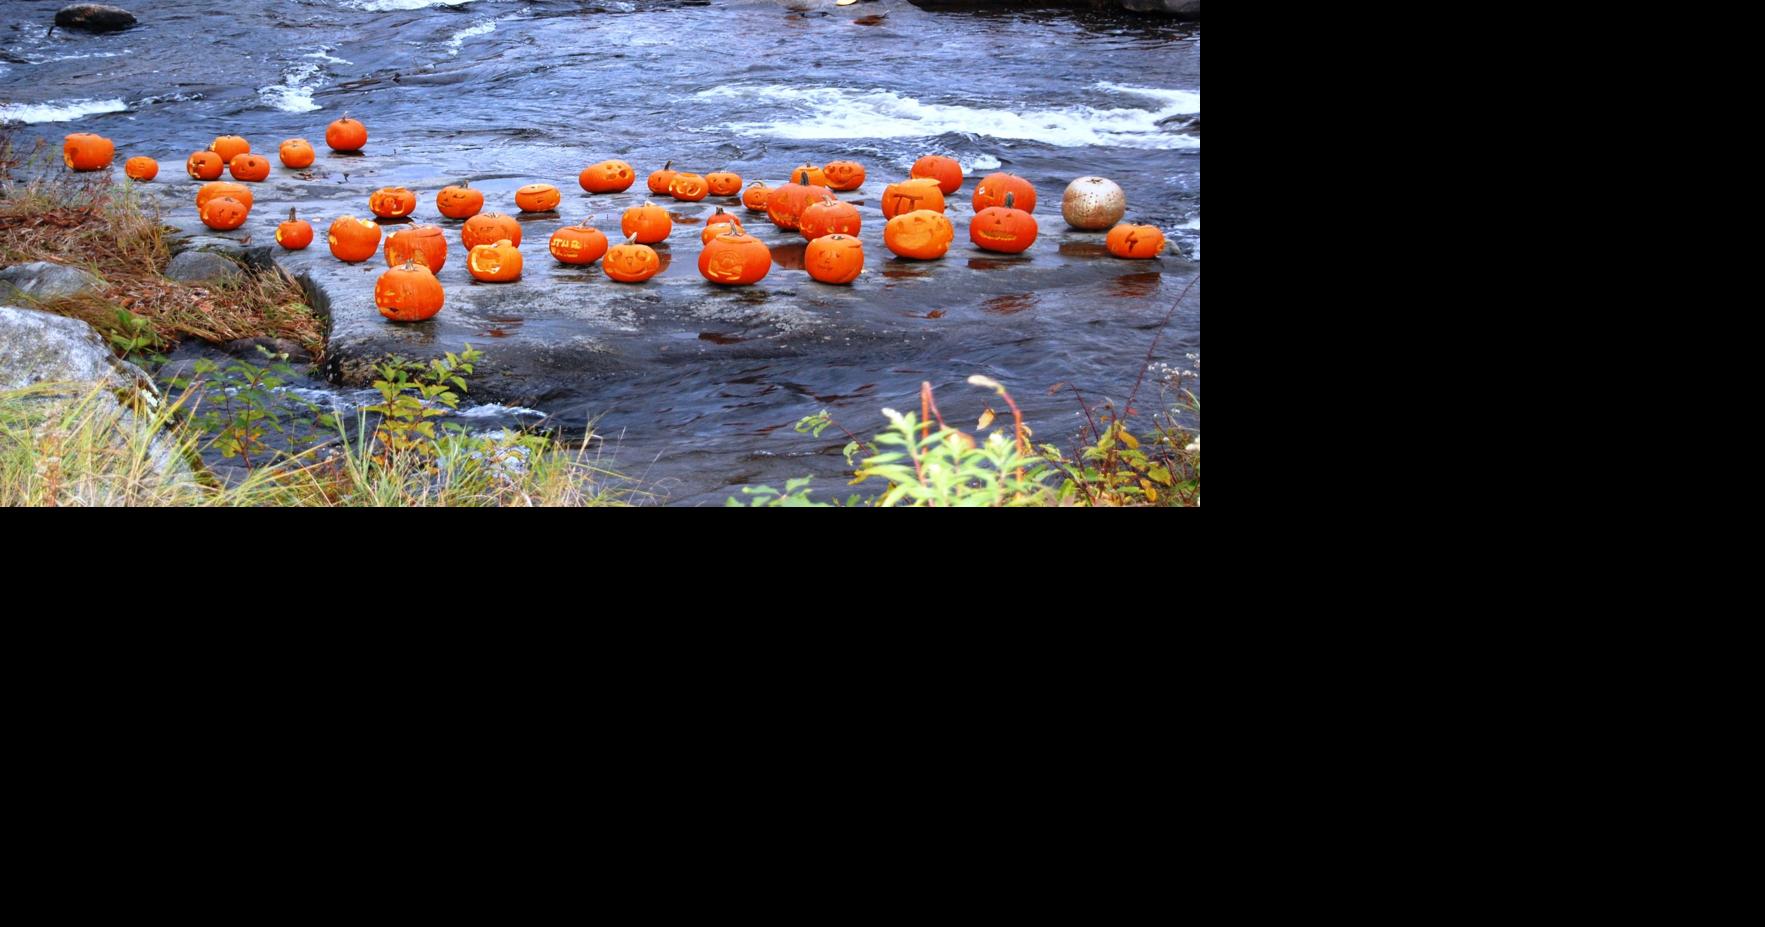 Littleton festival to fill river with jacko'lanterns Attractions